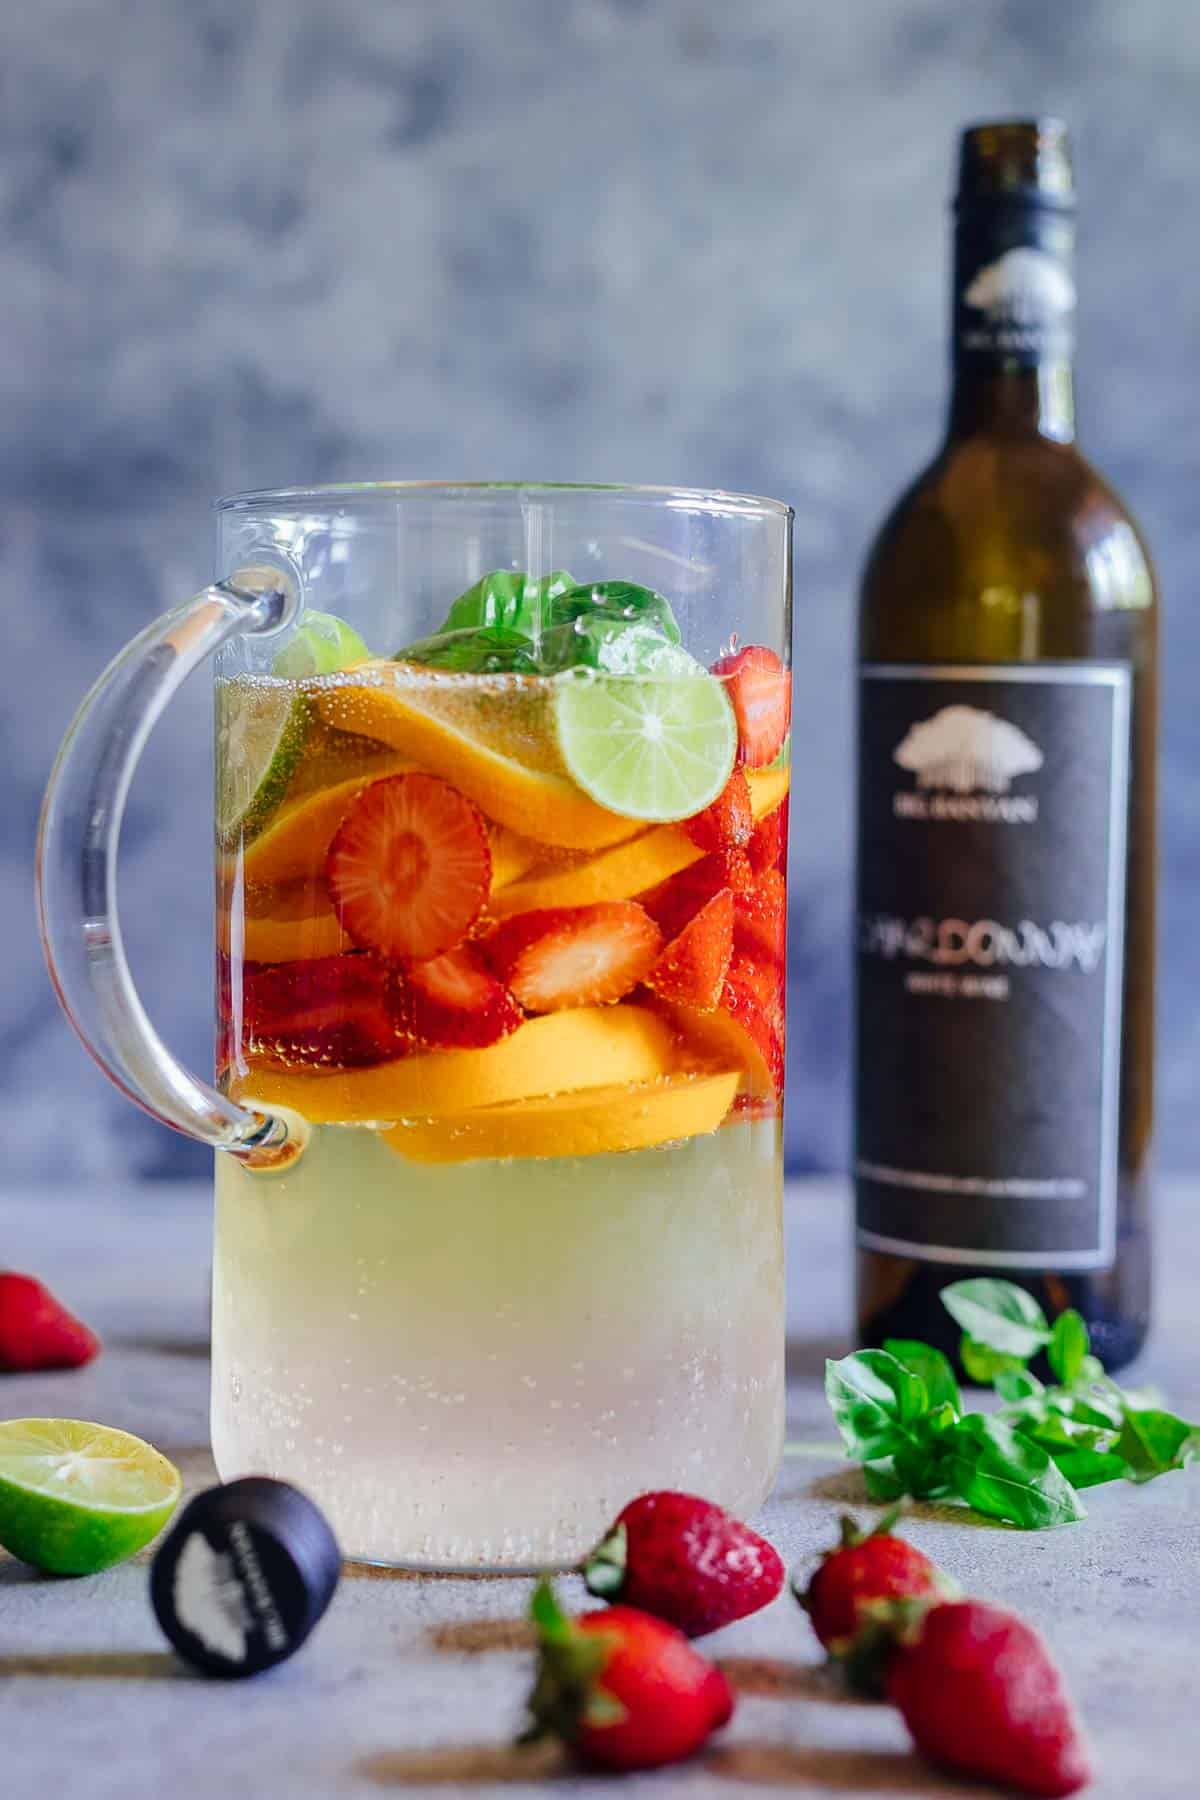 A pitcher of strawberry orange white wine sangria with a bottle of chardonnay in the background